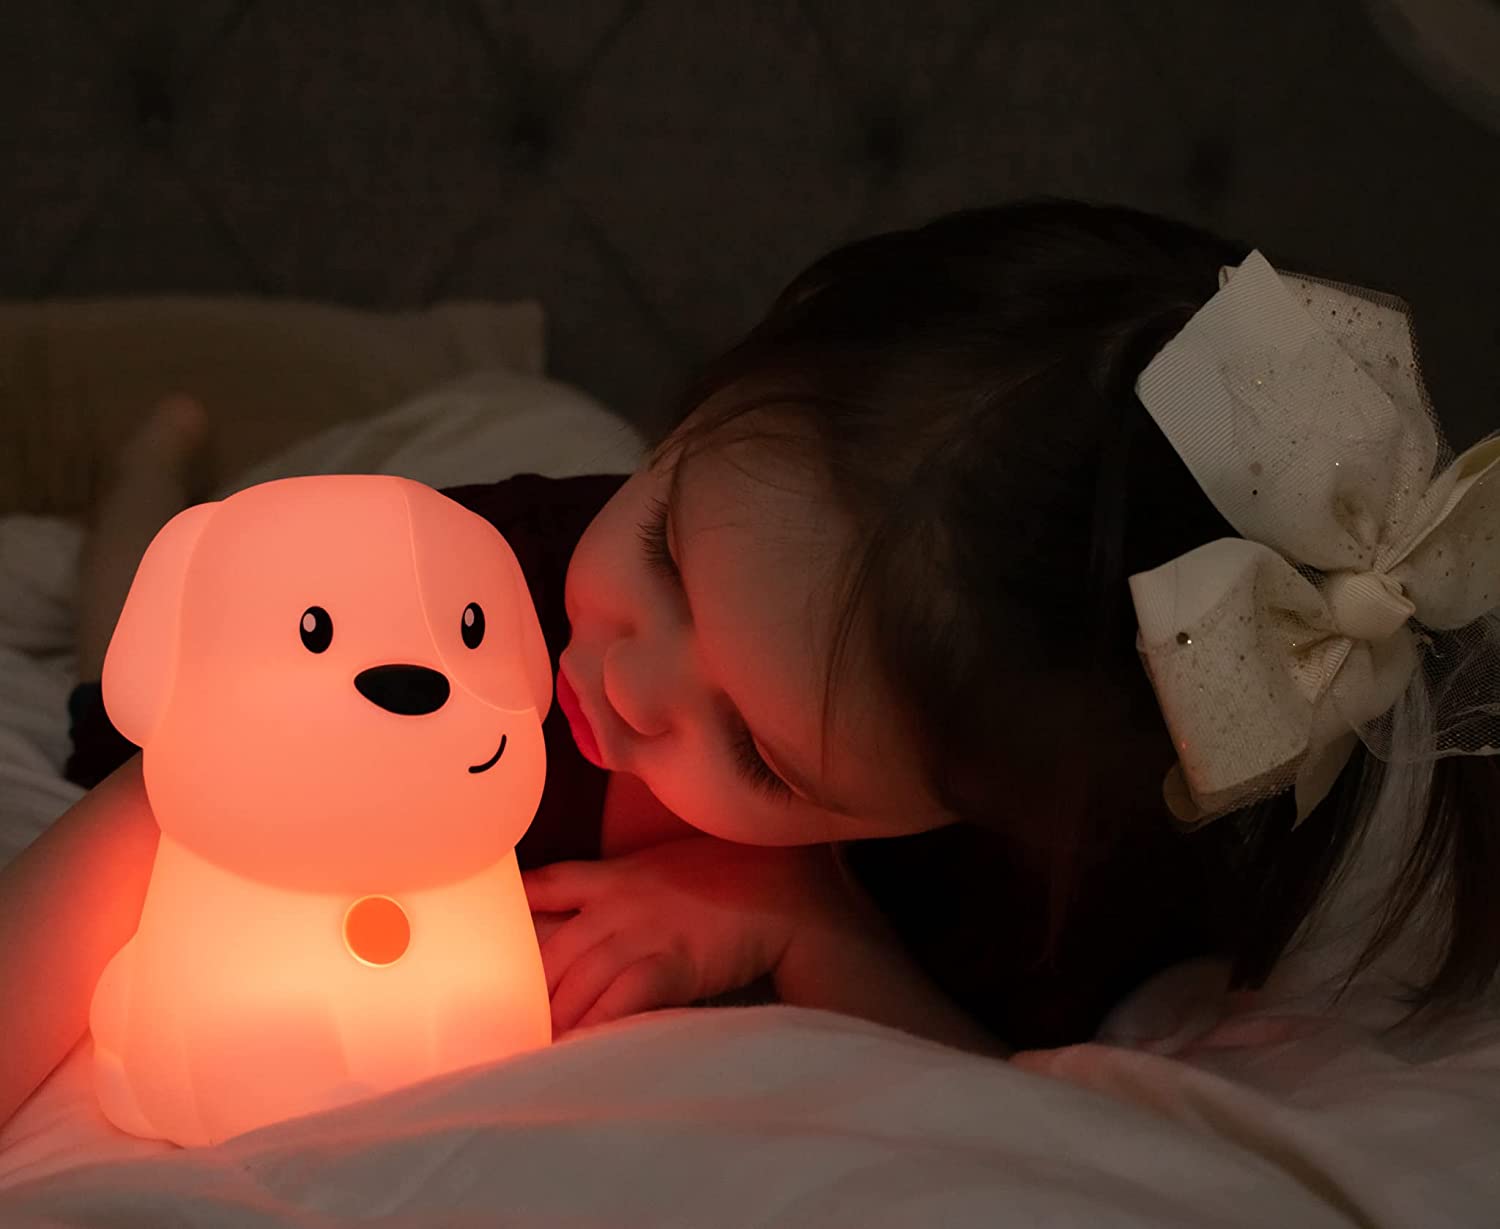 A child with light skin tone and long brown hair makes a face at the Dog LED Night Light Bluetooth Speaker. It is dark in the room and the Dog is lit up.